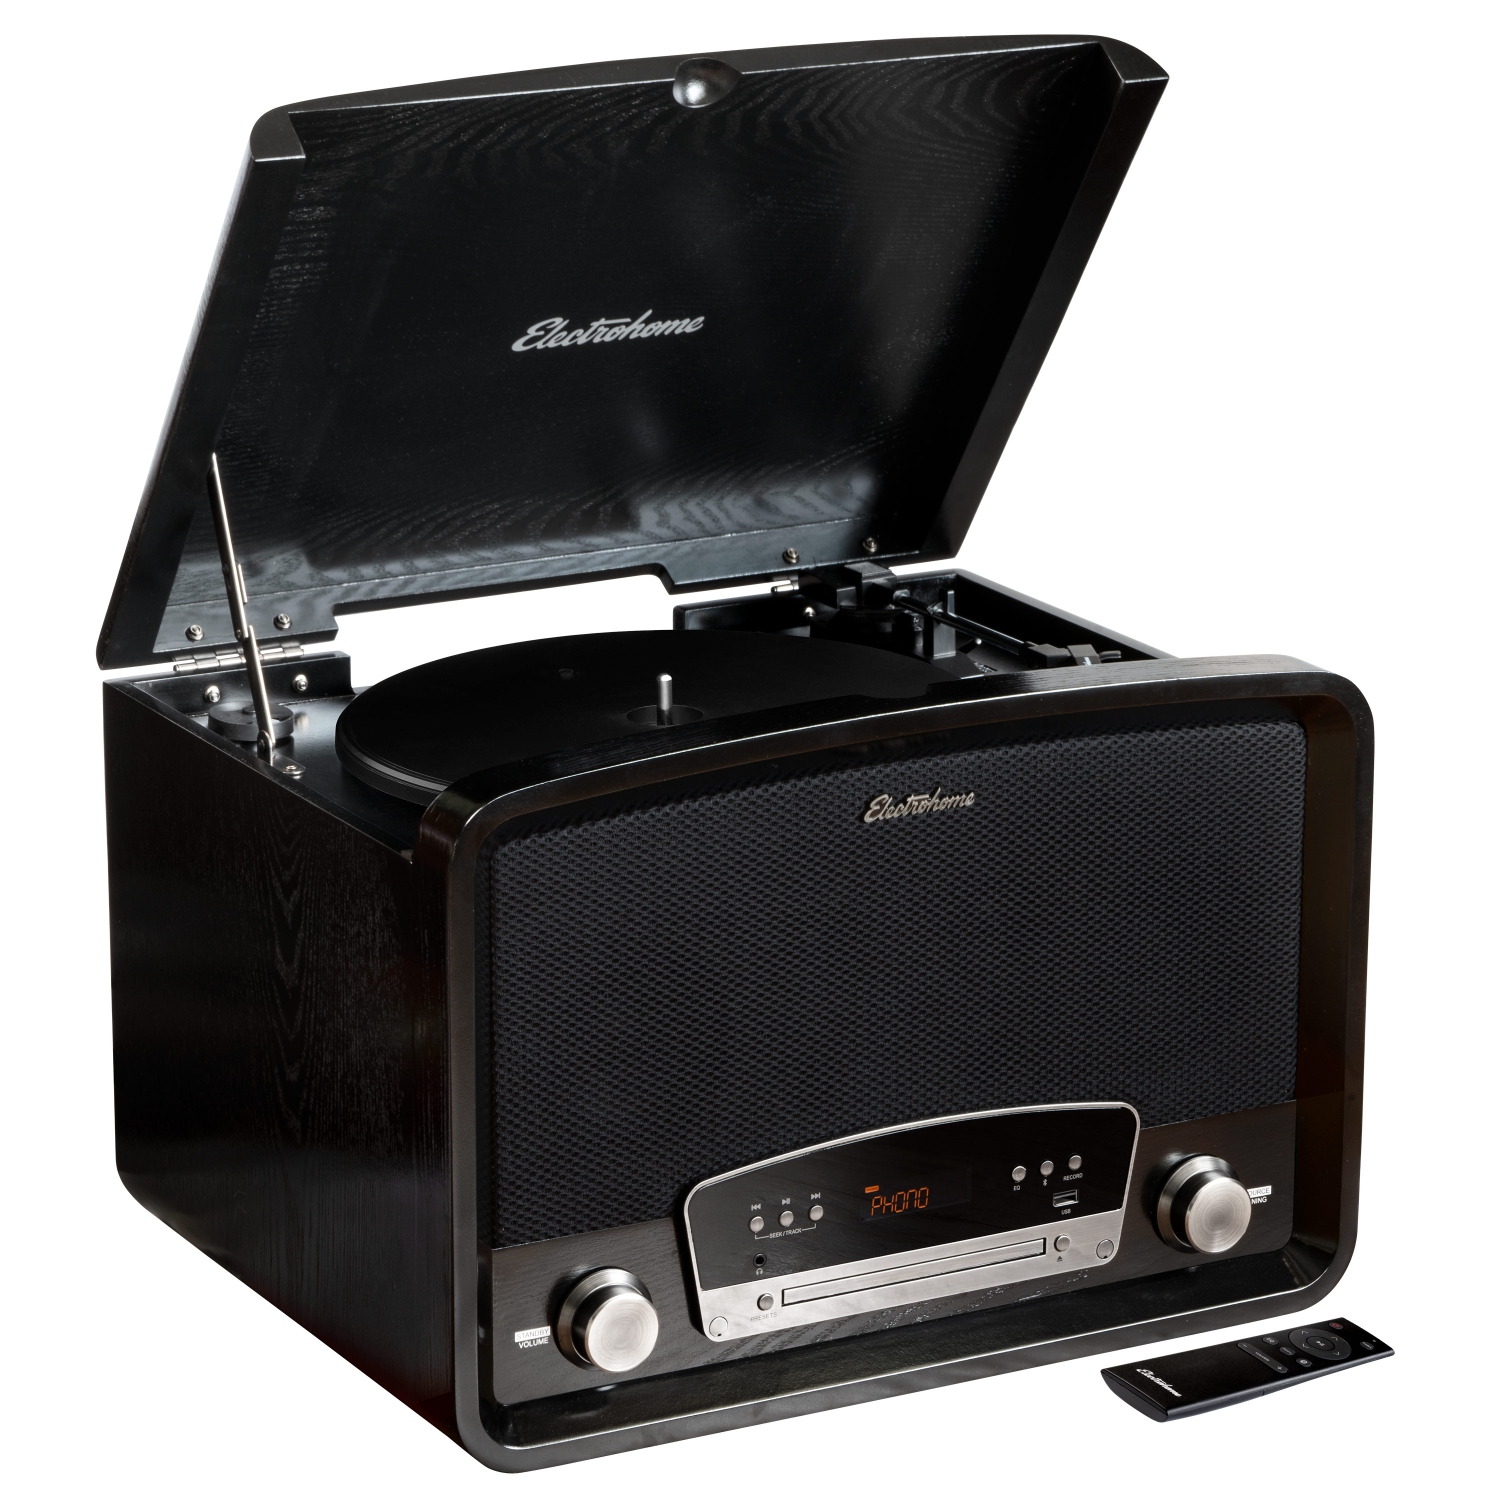 Electrohome Kingston Vintage Vinyl Record Player Stereo System - Turntable, Bluetooth, Radio, CD, Aux, USB, Vinyl to MP3